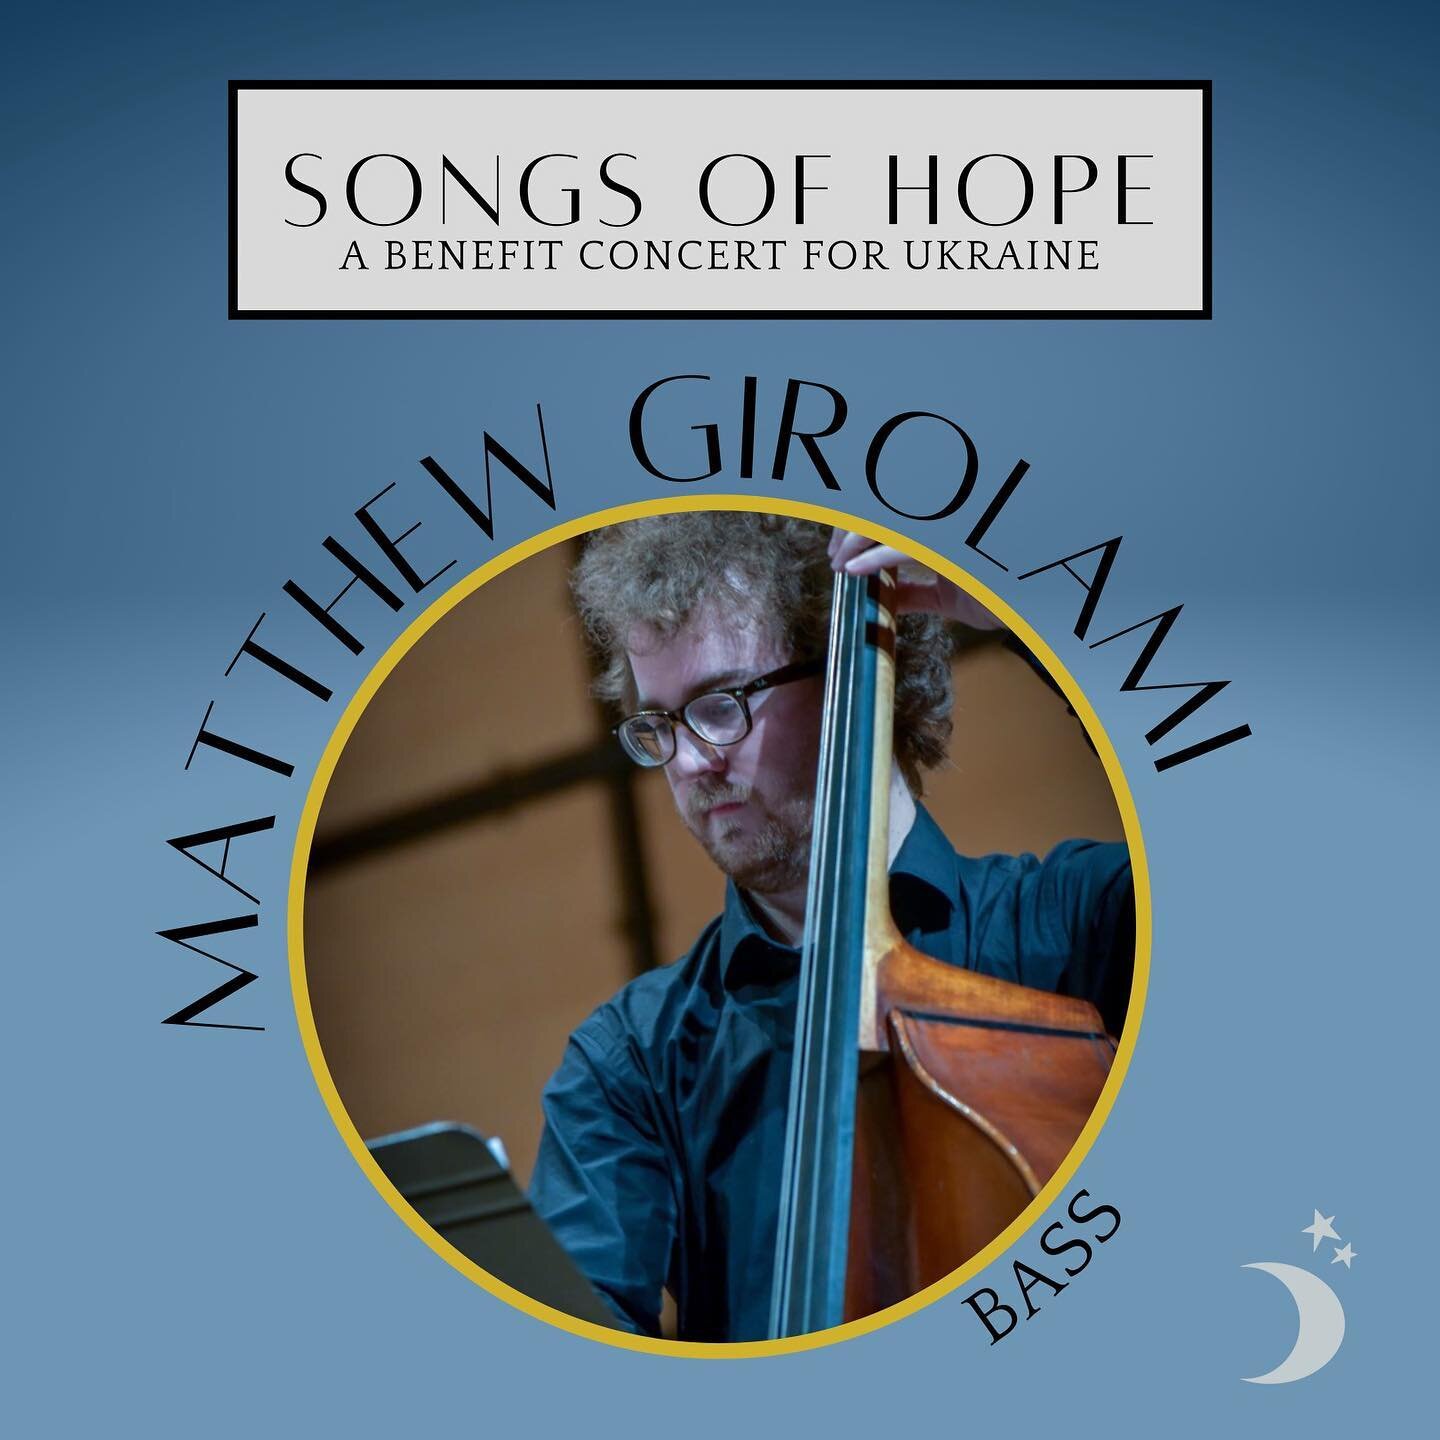 Meet our bassist, Matthew Girolami!!! Matthew is an experienced performer and coach and has performed with the Tafelmusik Baroque Winter Institute, American Bach soloists Academy, Vancouver Summer Orchestral Institute at Whistler, Toronto Chamber Cho